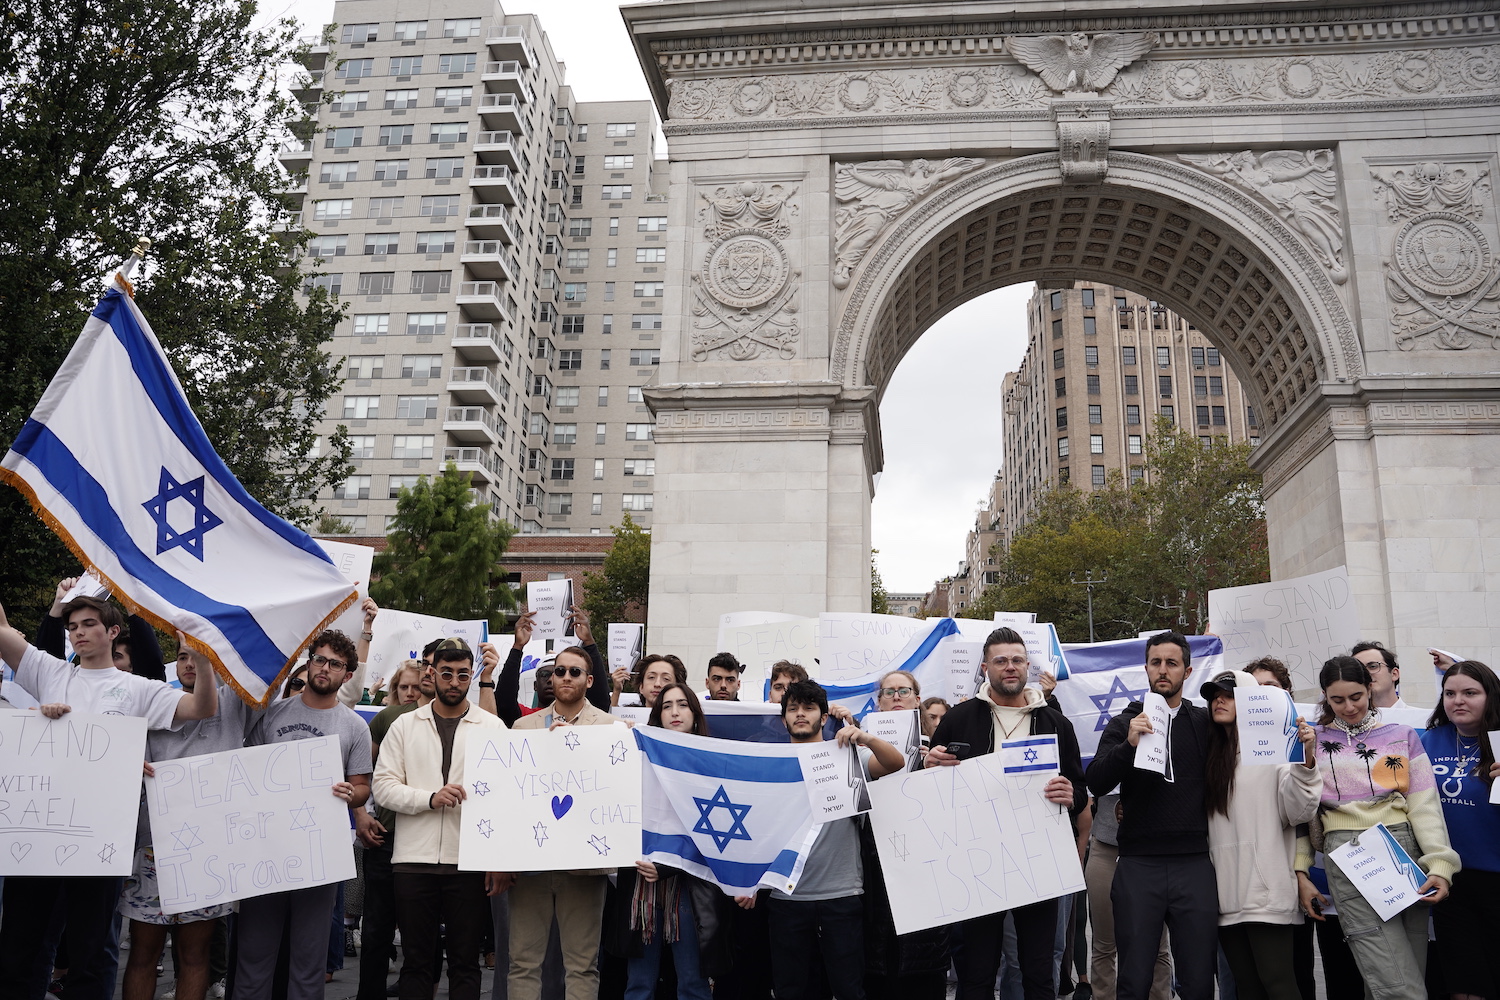 A crowd of people with signs and flags stand in front of the Washington Square Arch.